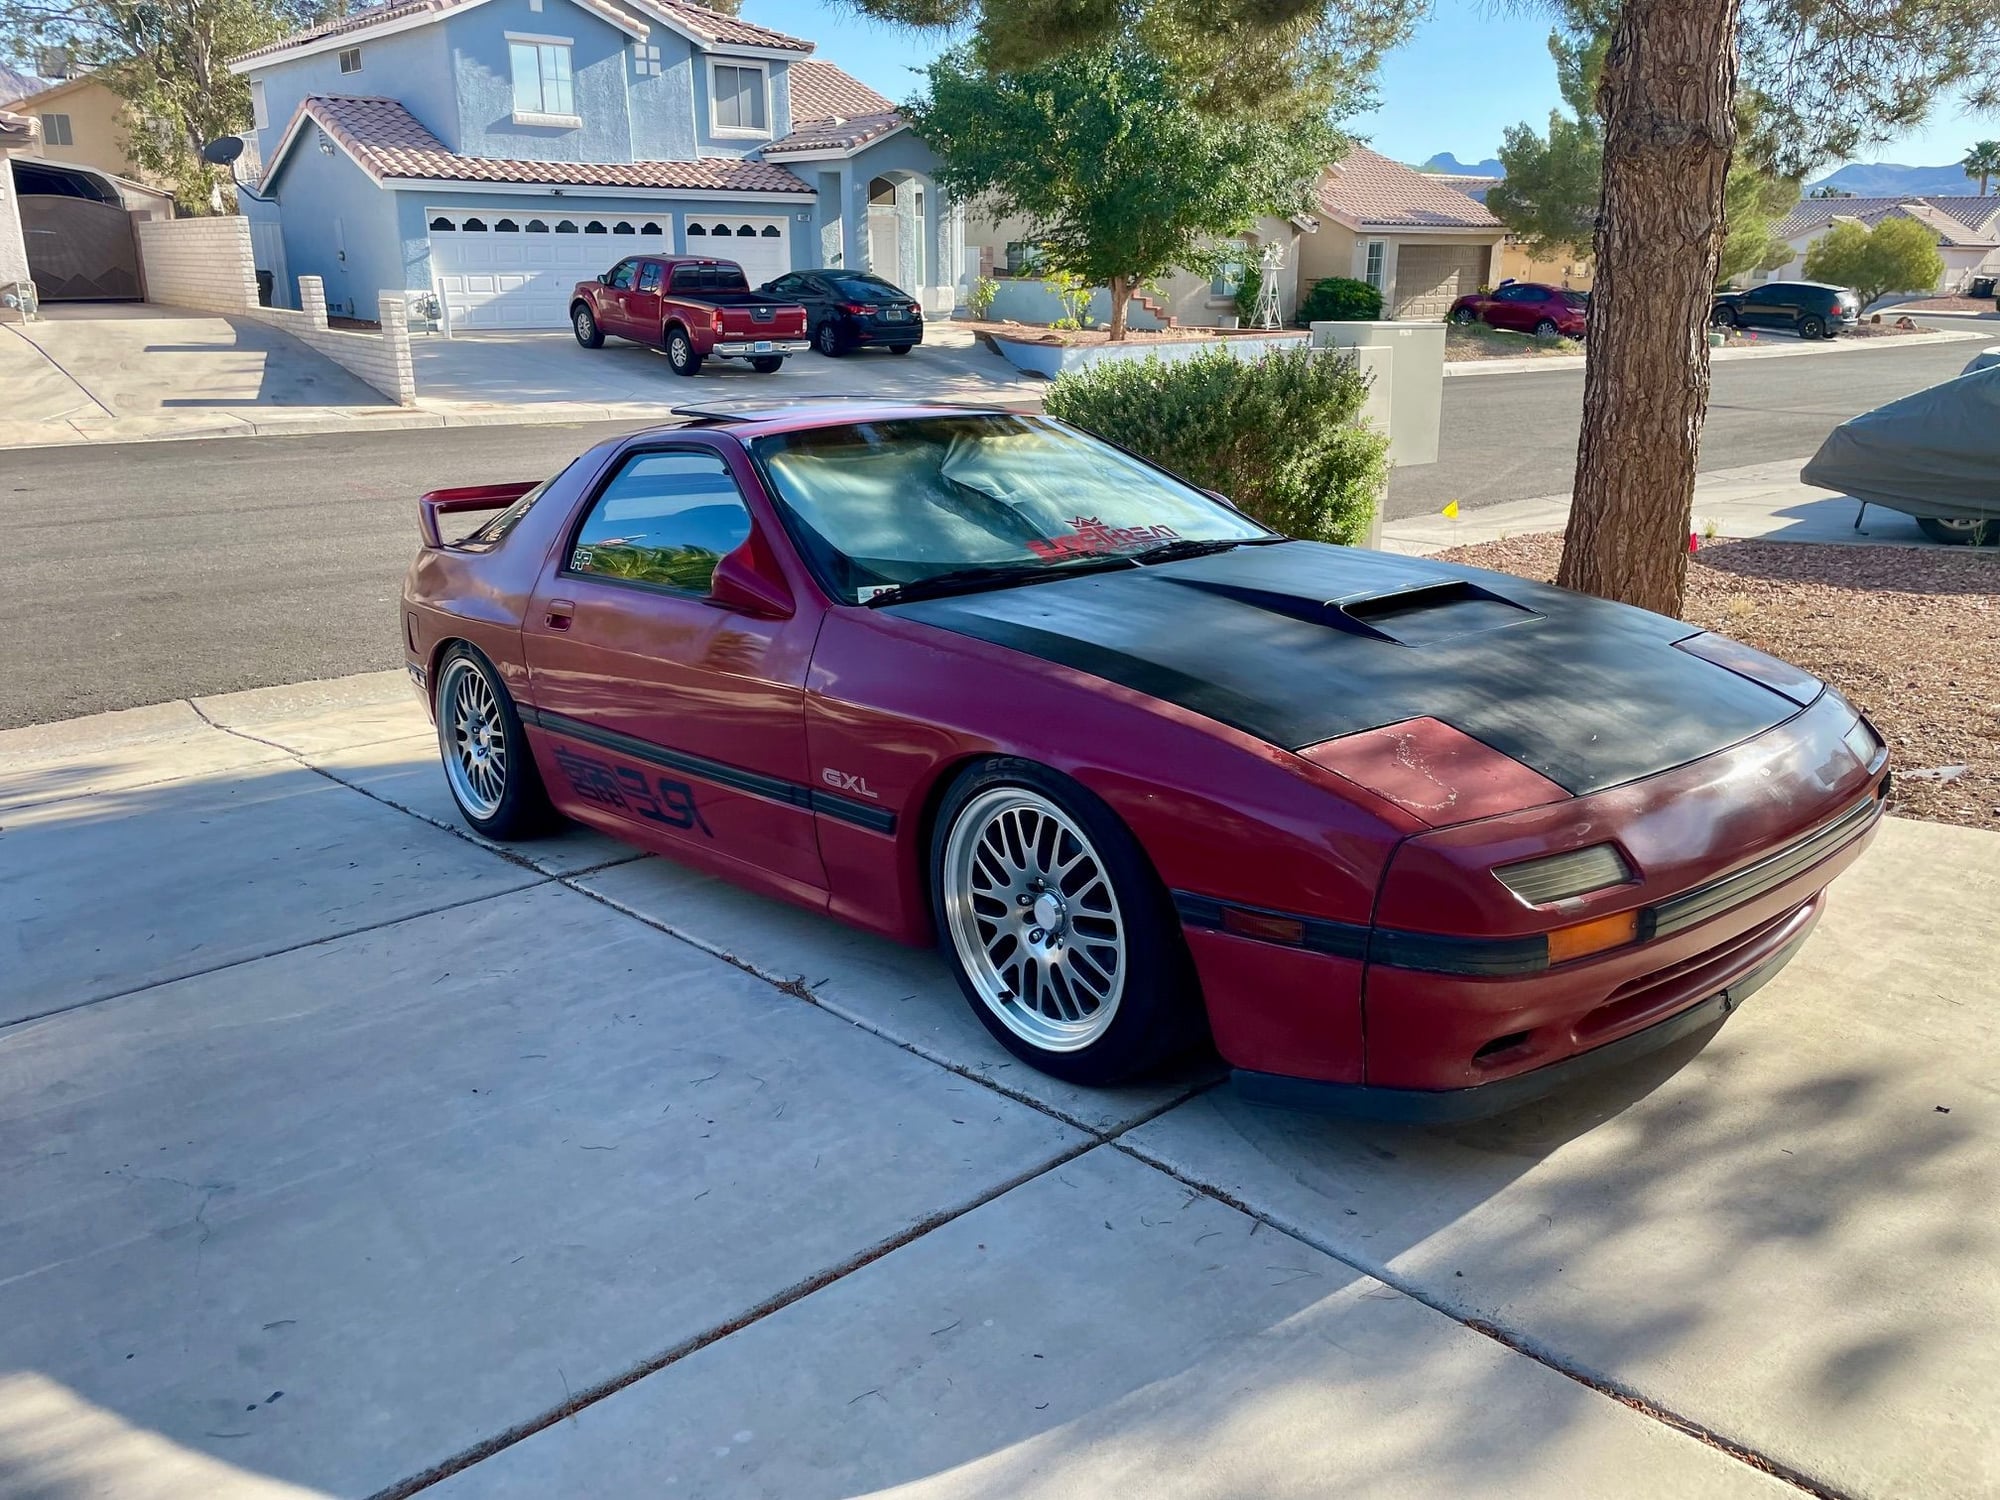 1986 Mazda RX-7 - Selling my s4 GXL TII swapped FC - Used - VIN JM1FC3317G0158563 - 169,596 Miles - Manual - Coupe - Red - Henderson, NV 89002, United States